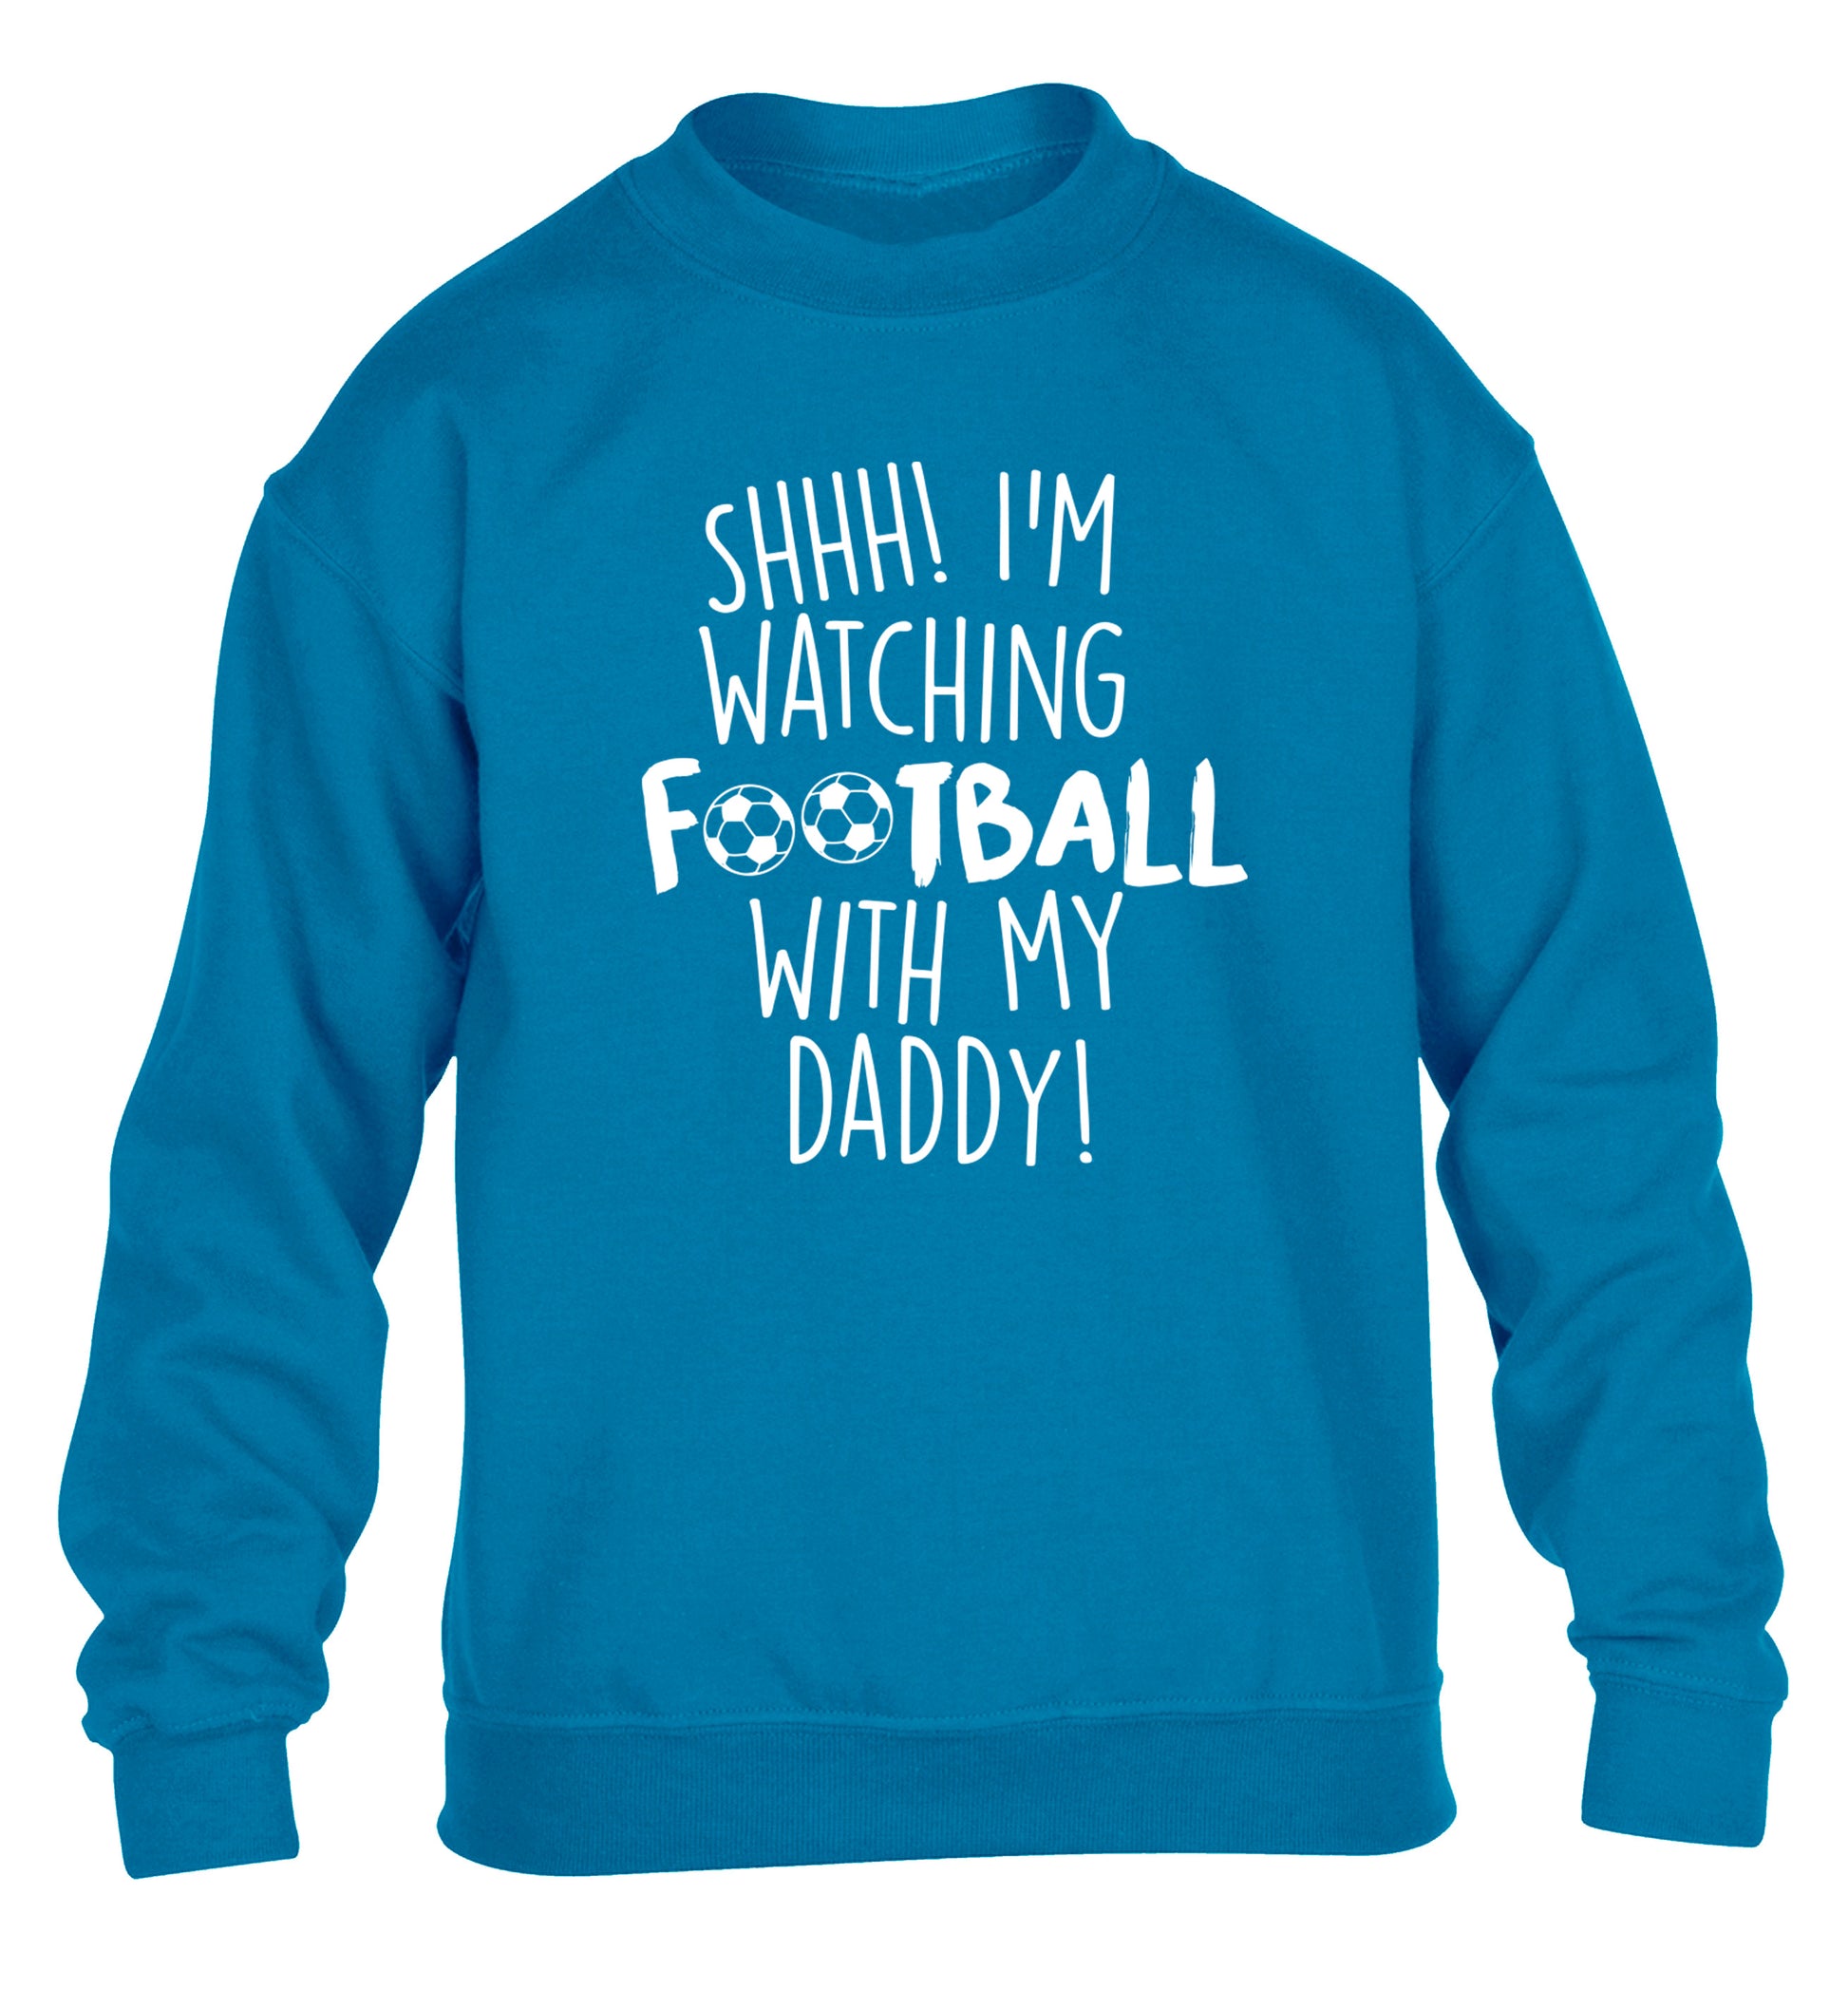 Shhh I'm watching football with my daddy children's blue sweater 12-14 Years